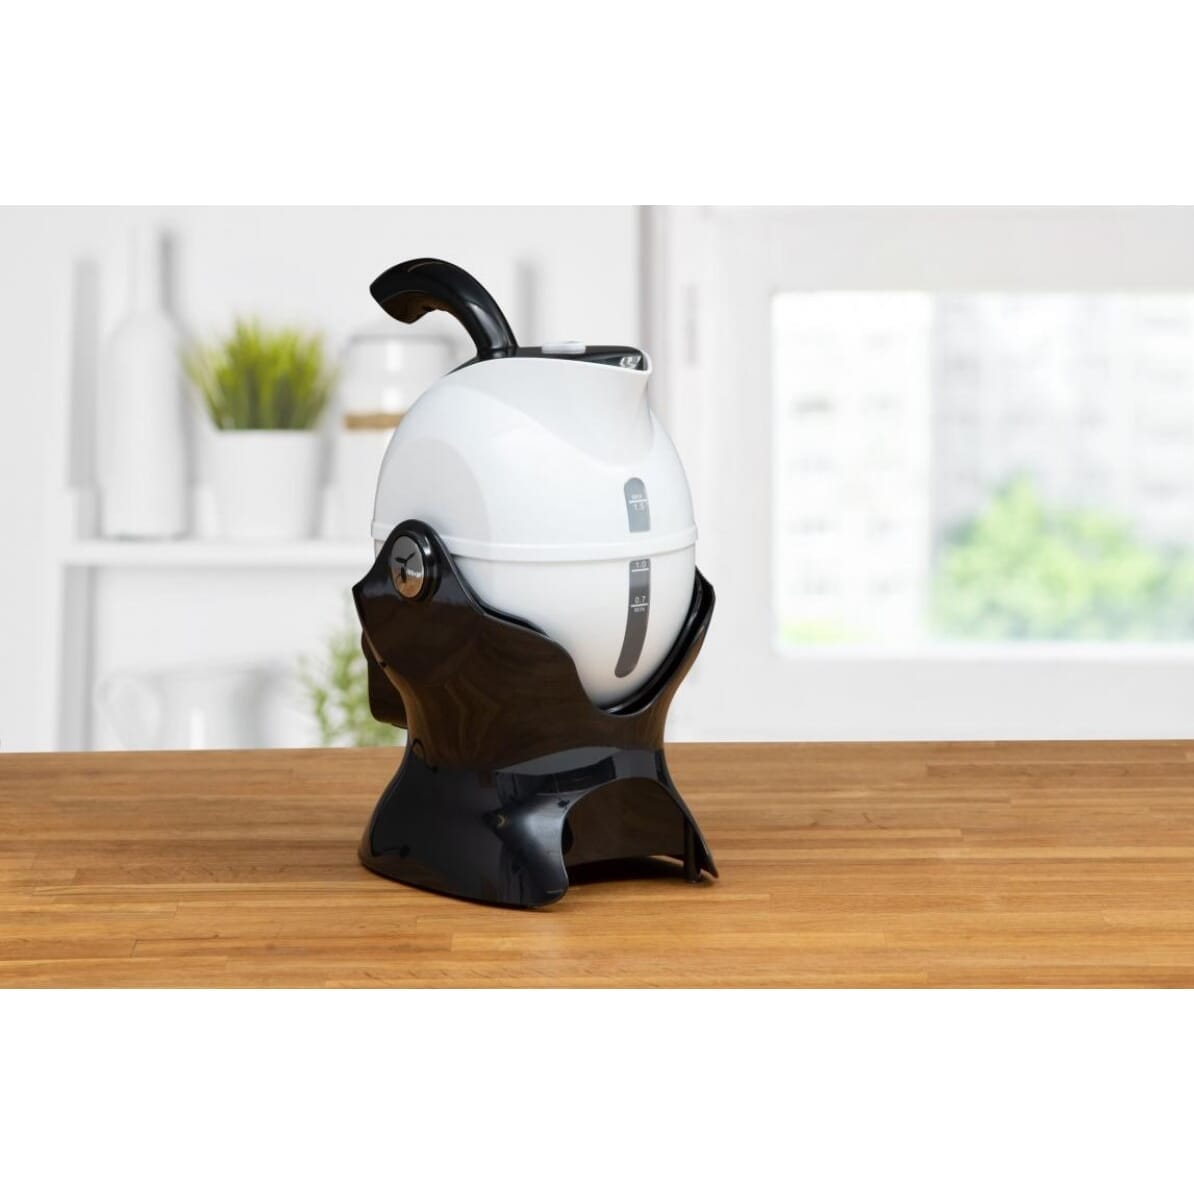 View Uccello Kettle BlackWhite information